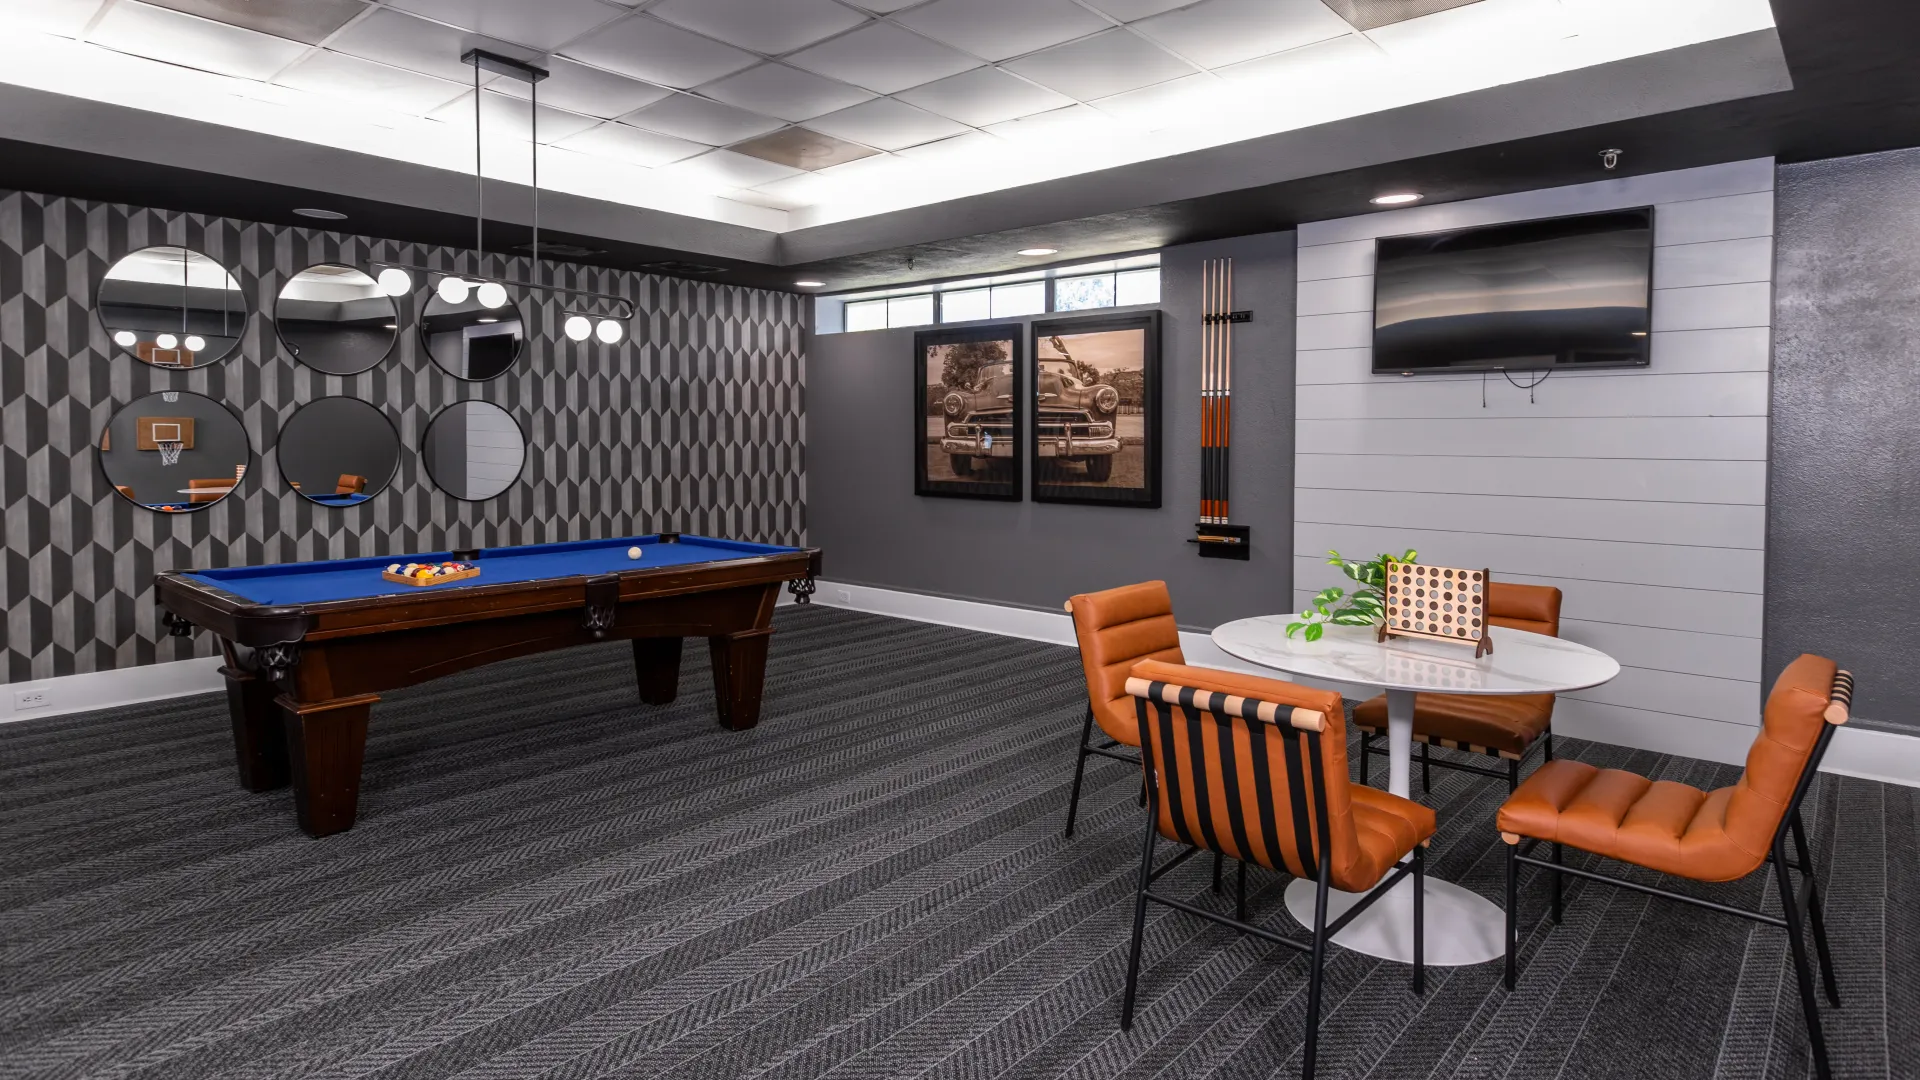 Game room featuring a blue felt billiards table, a round table with orange chairs, and modern decor with circular mirrors and vintage car photos on the walls.